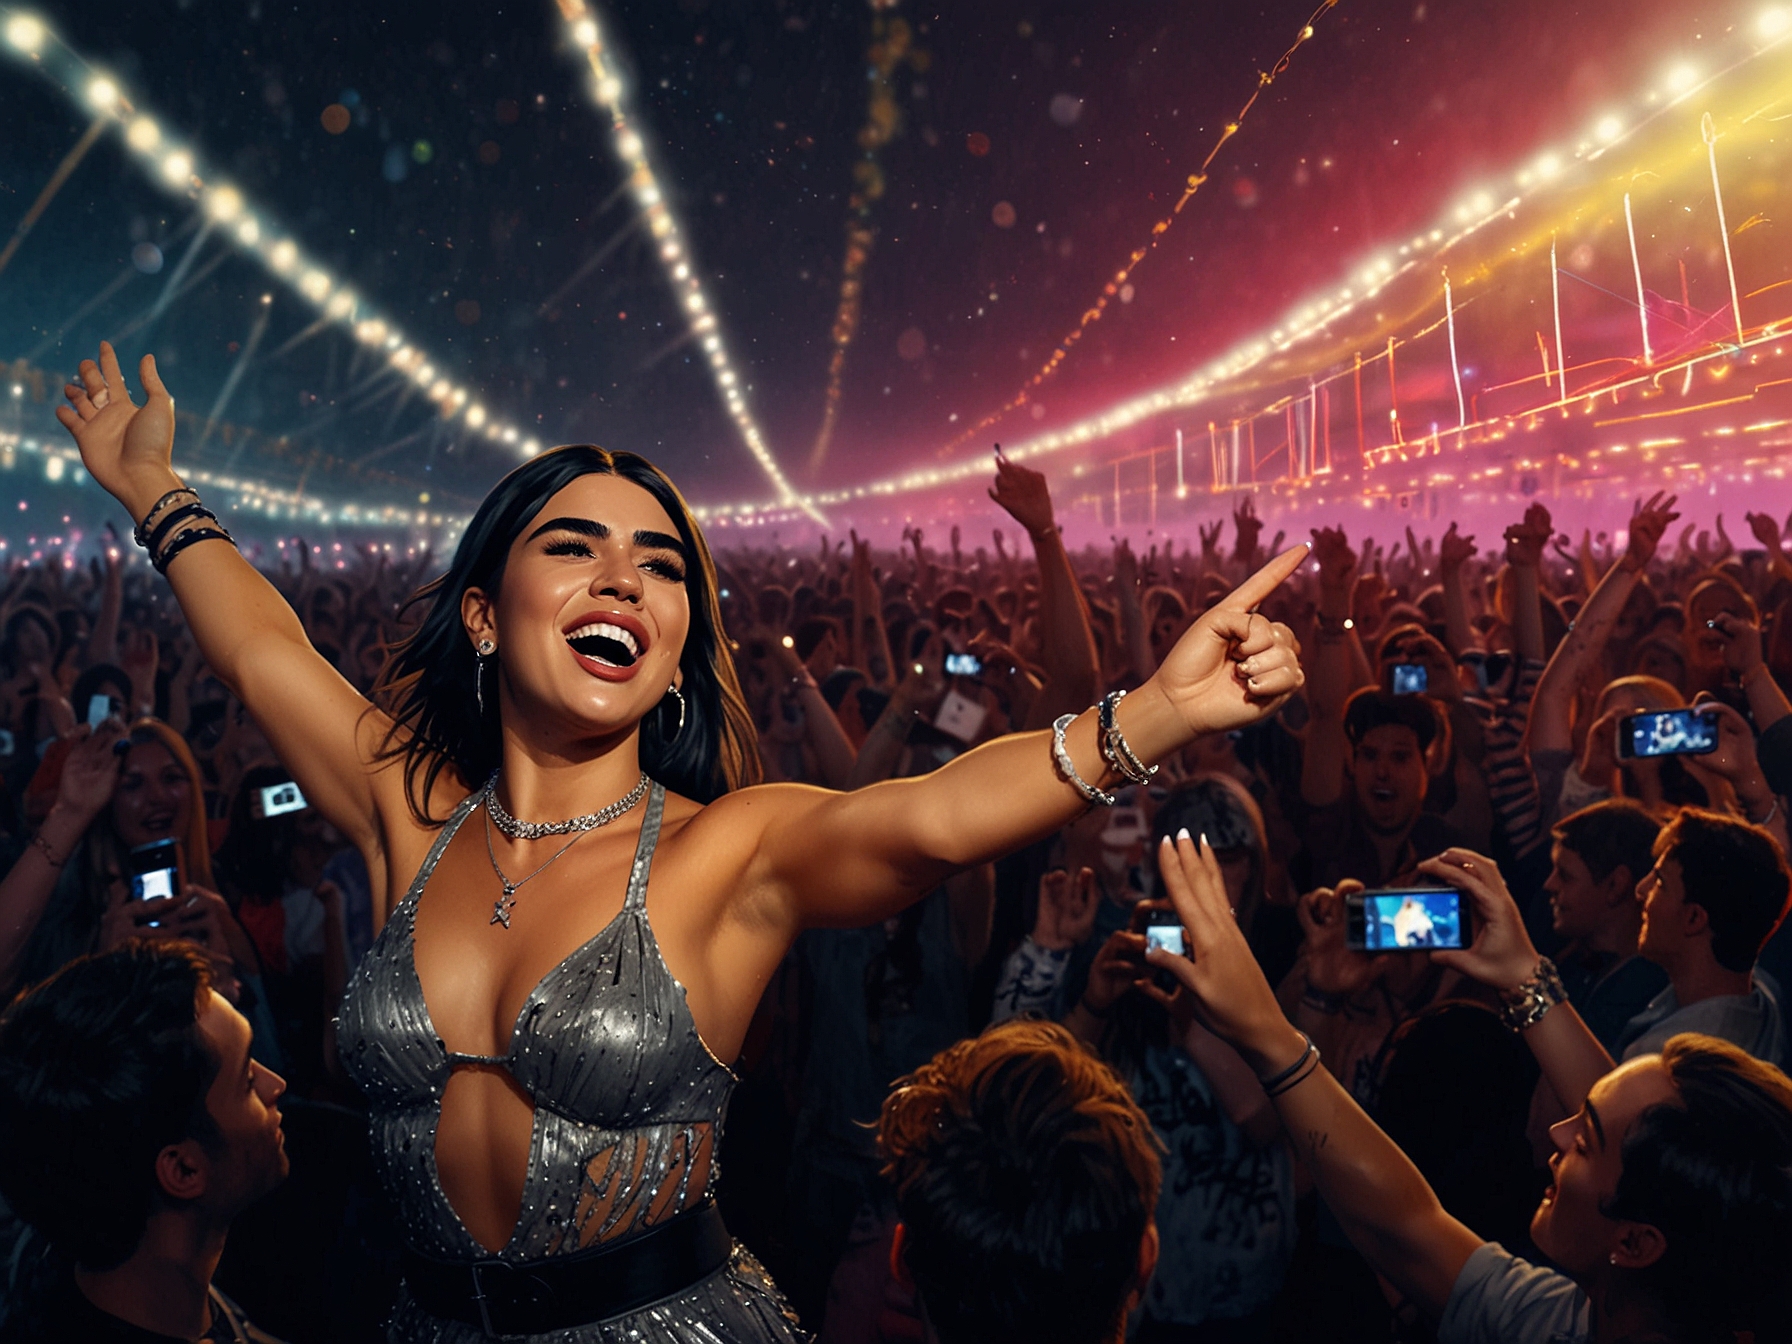 Dua Lipa electrifies the Glastonbury stage with her high-energy performance, captivating the audience with hits from 'Future Nostalgia' and 'Dua Lipa.' The crowd is alive with excitement.